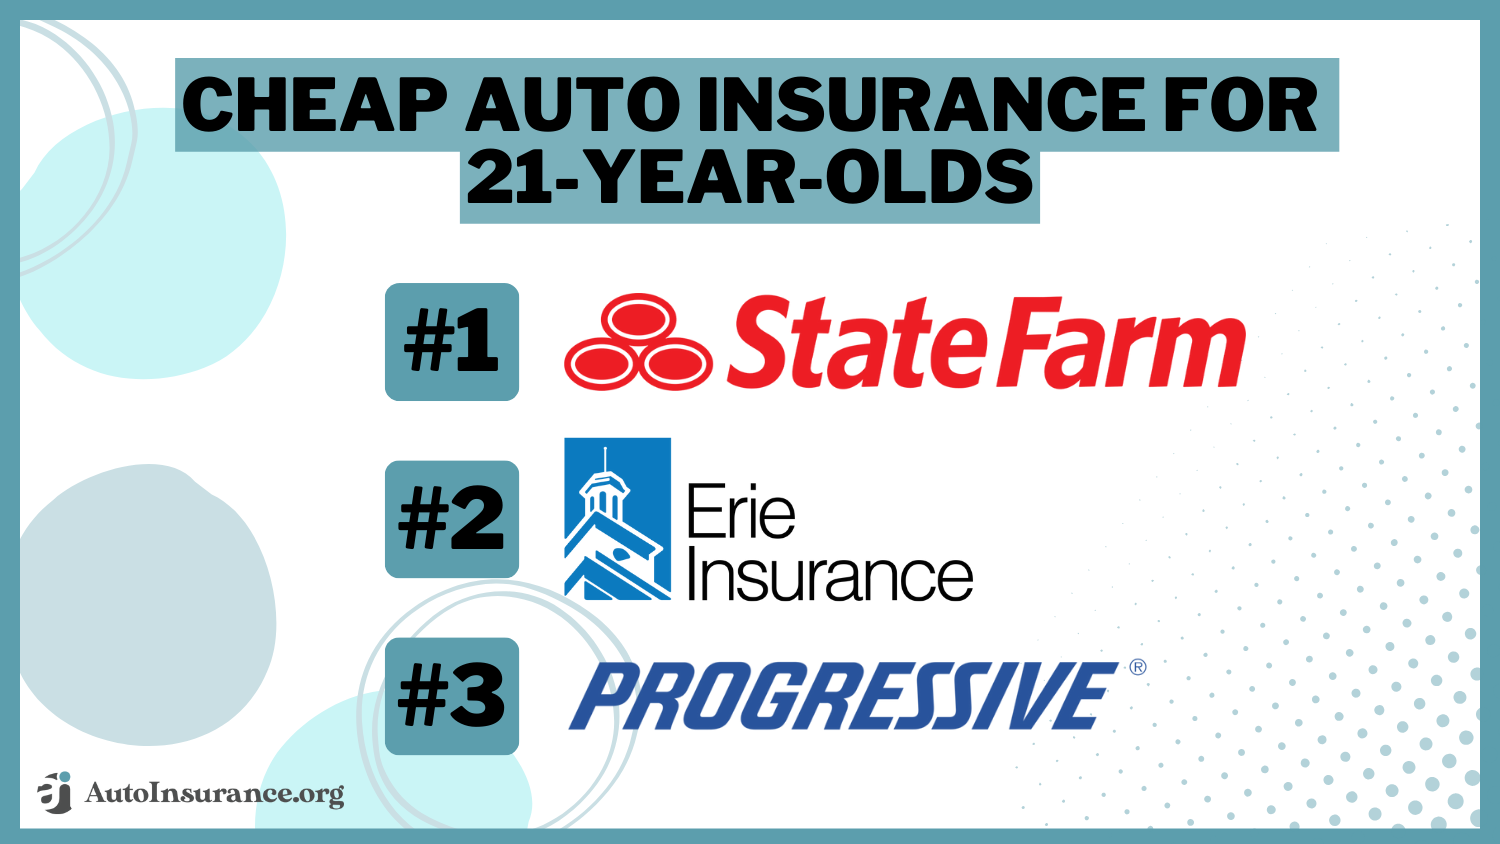 Cheap Auto Insurance for 21-Year-Olds: State Farm, Erie, Progressive